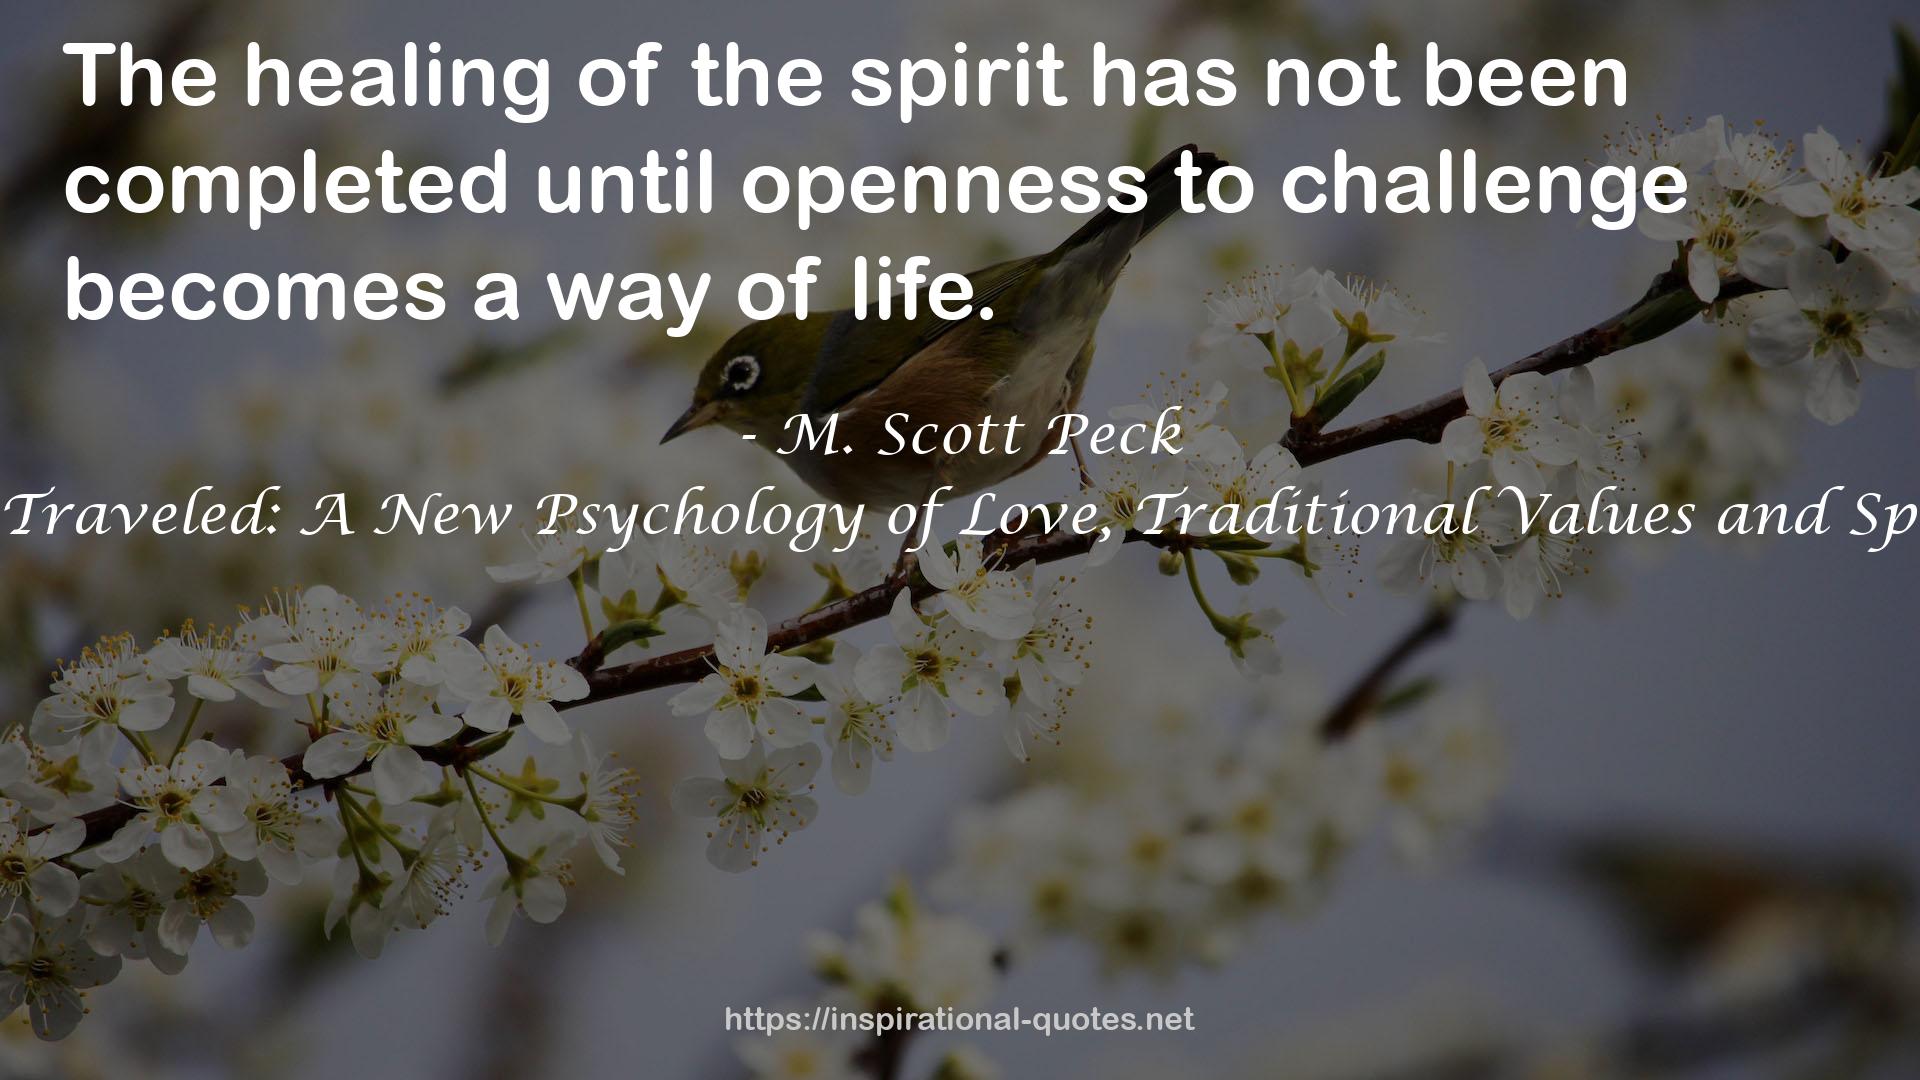 The Road Less Traveled: A New Psychology of Love, Traditional Values and Spiritual Growth QUOTES